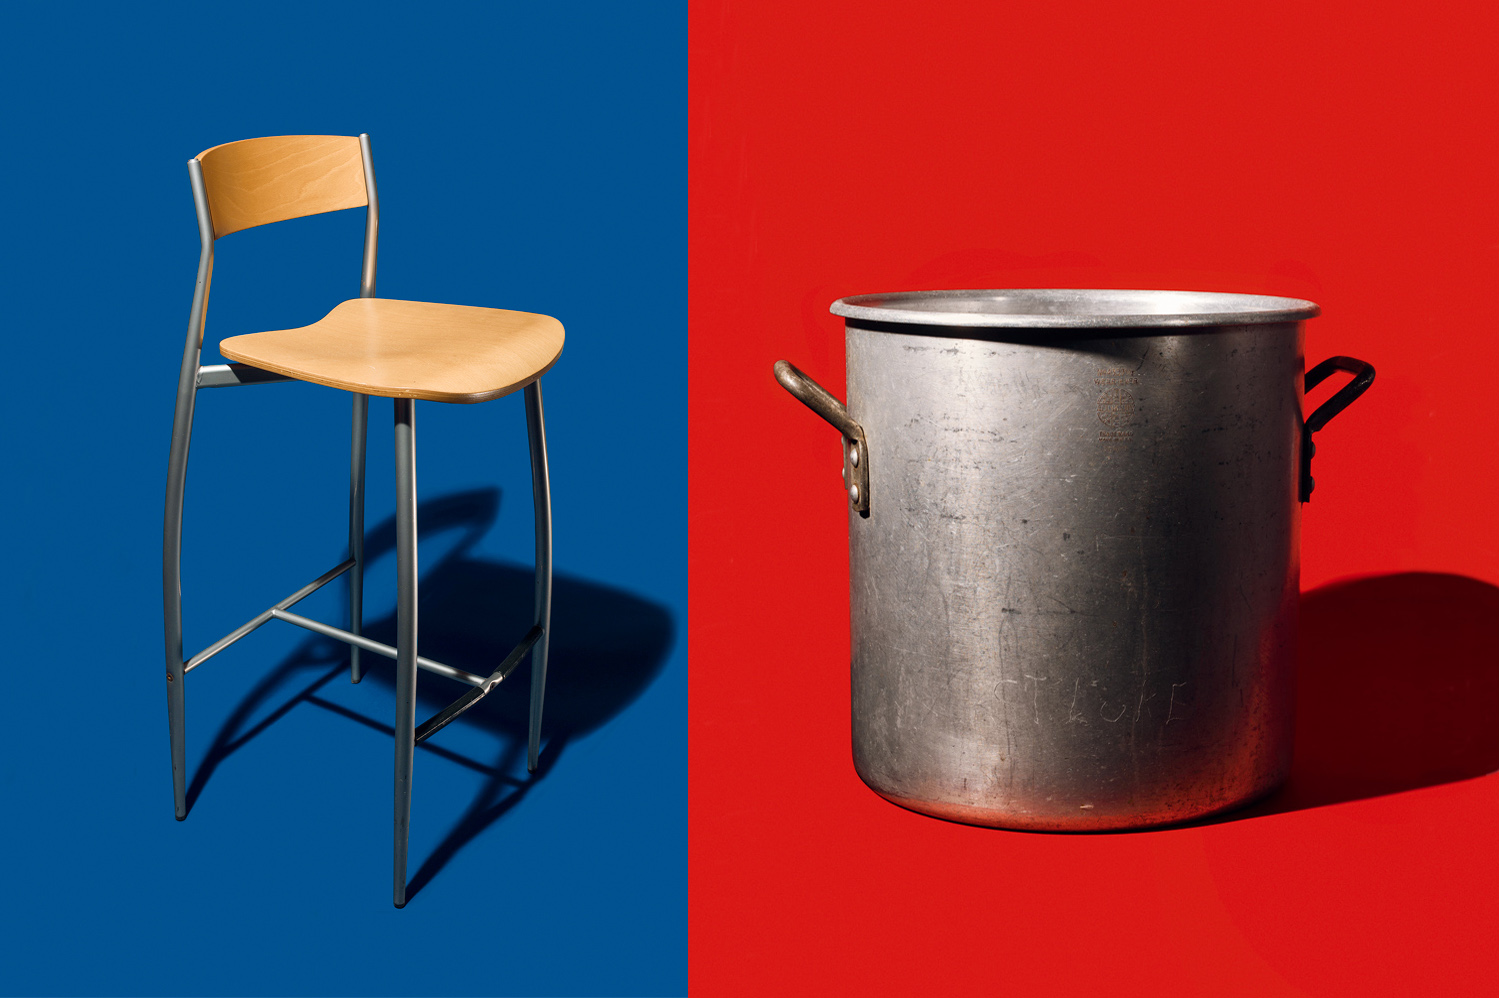 Image: Clint Eastwood's Chair and Soup Kitchen Pot